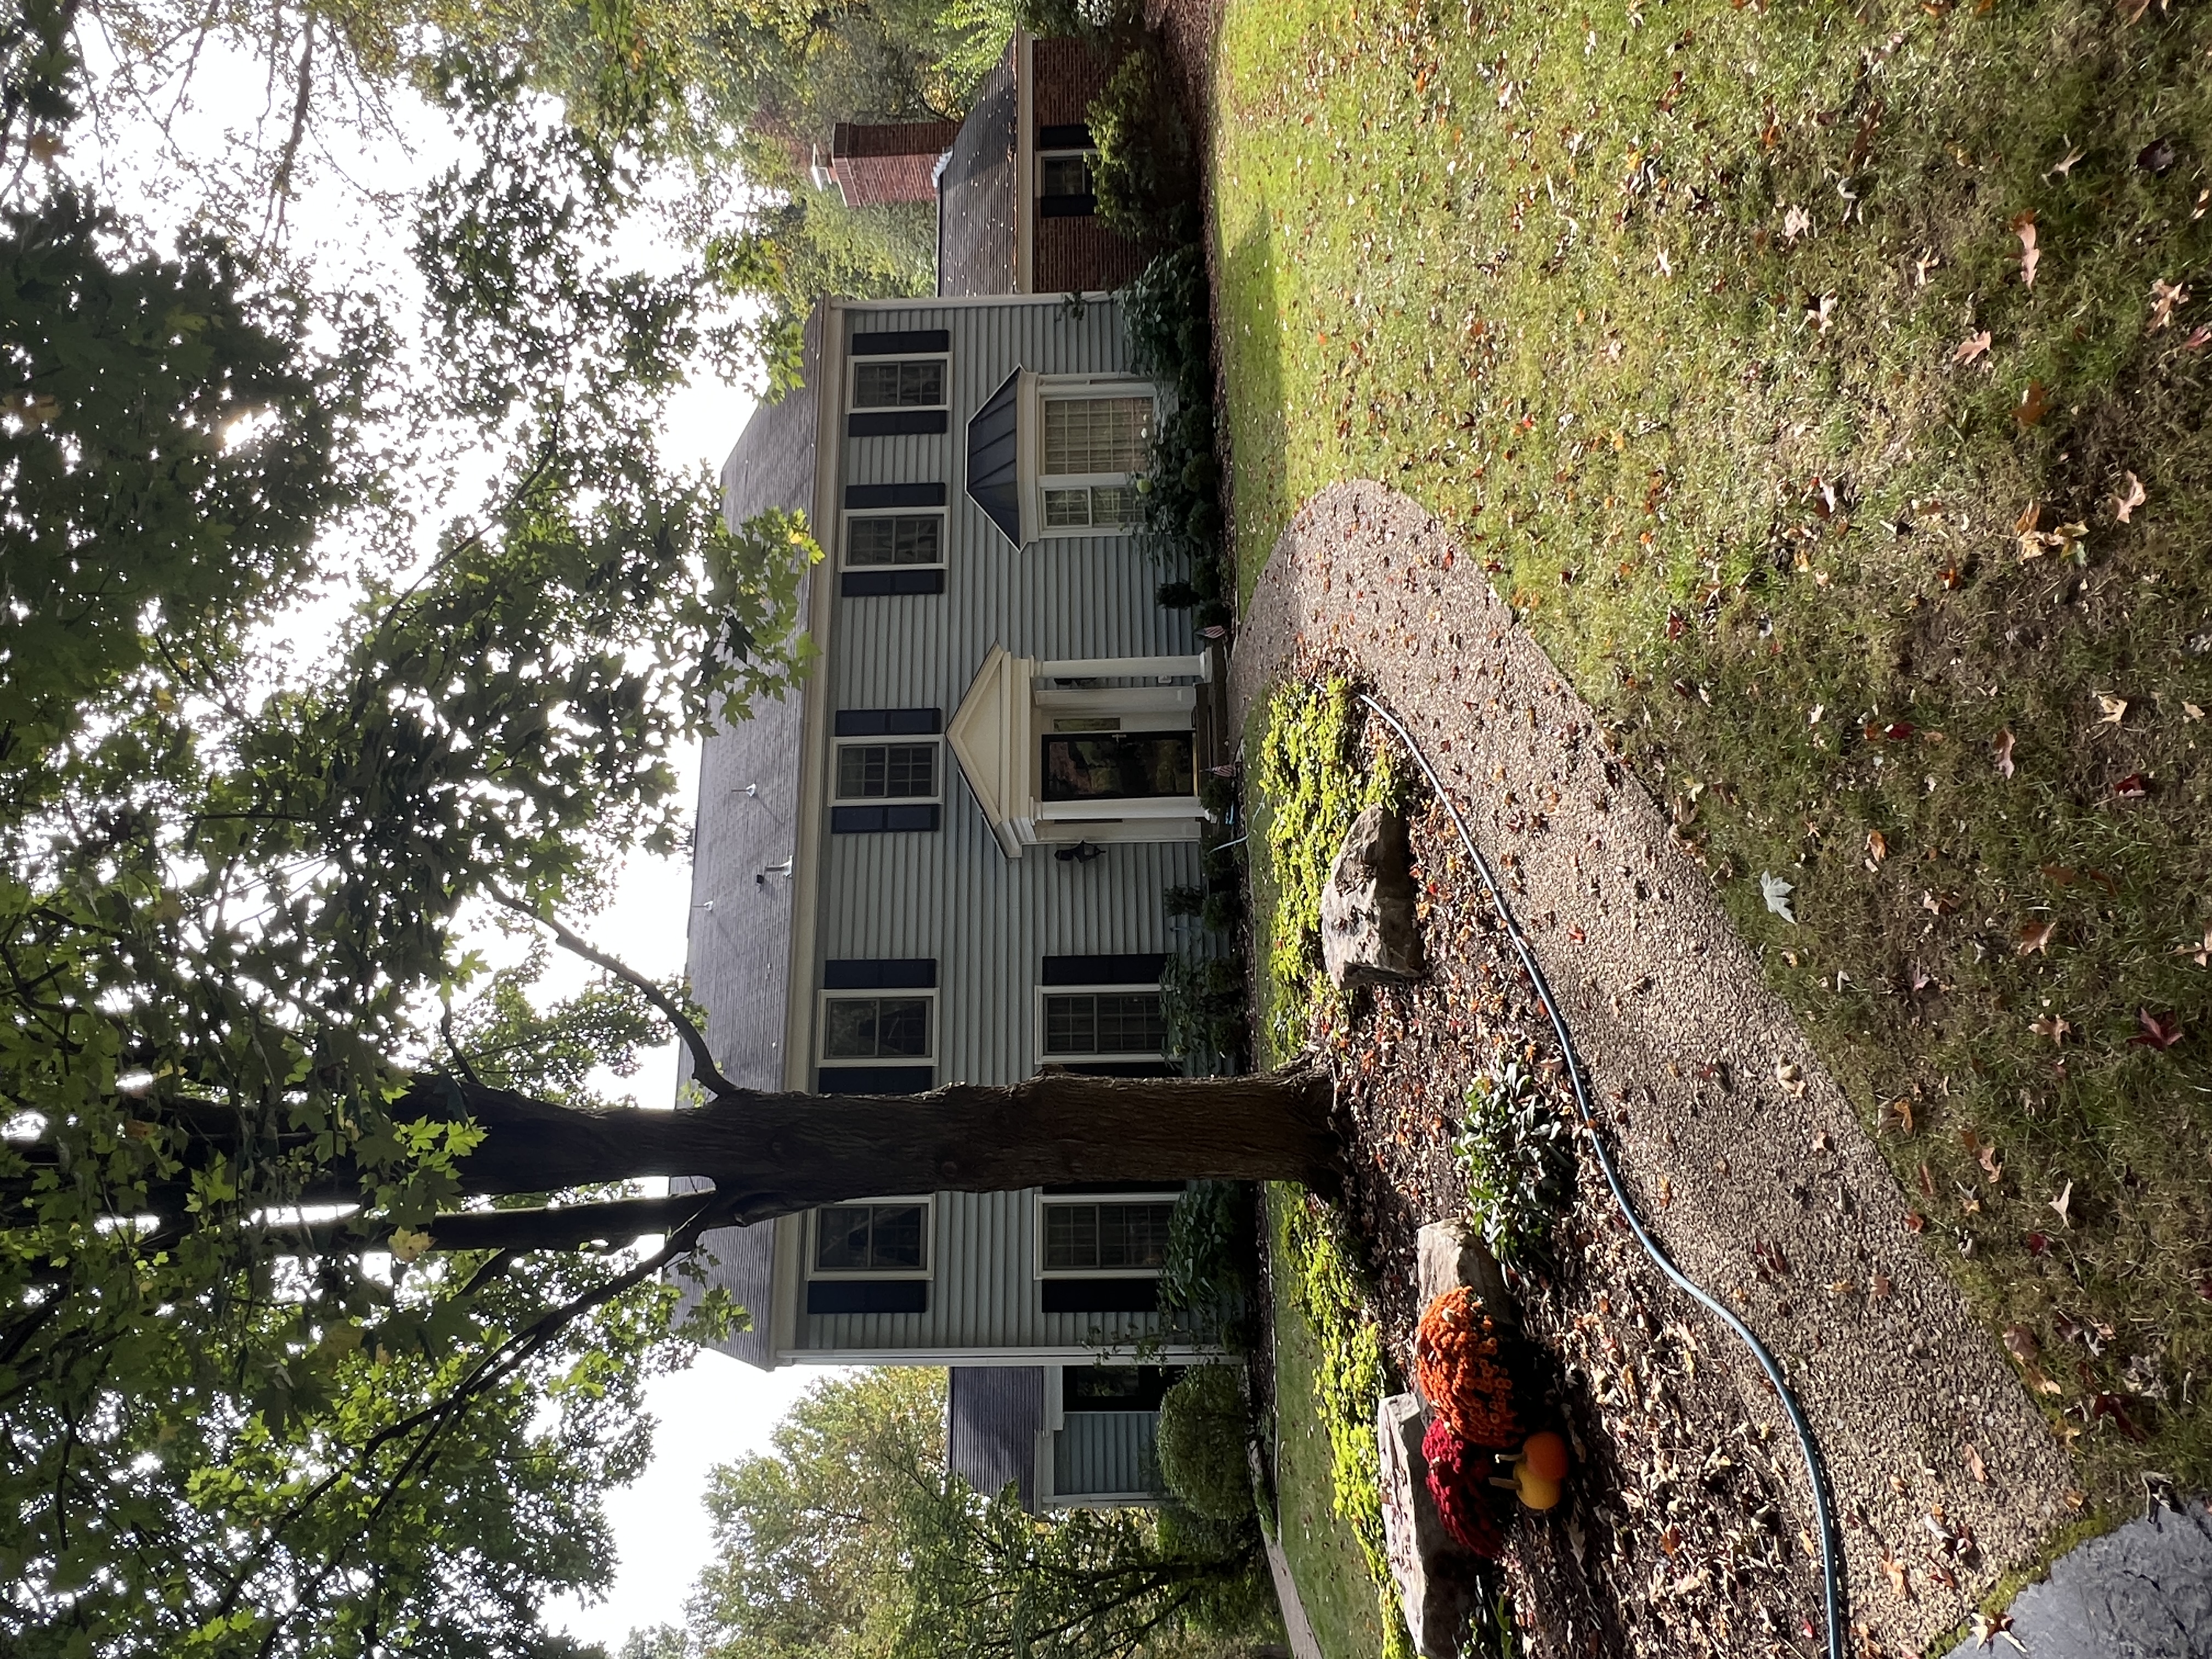 Gutter Glory in Fox Chapel: J&R Pressure Washing Transforms Local Home!